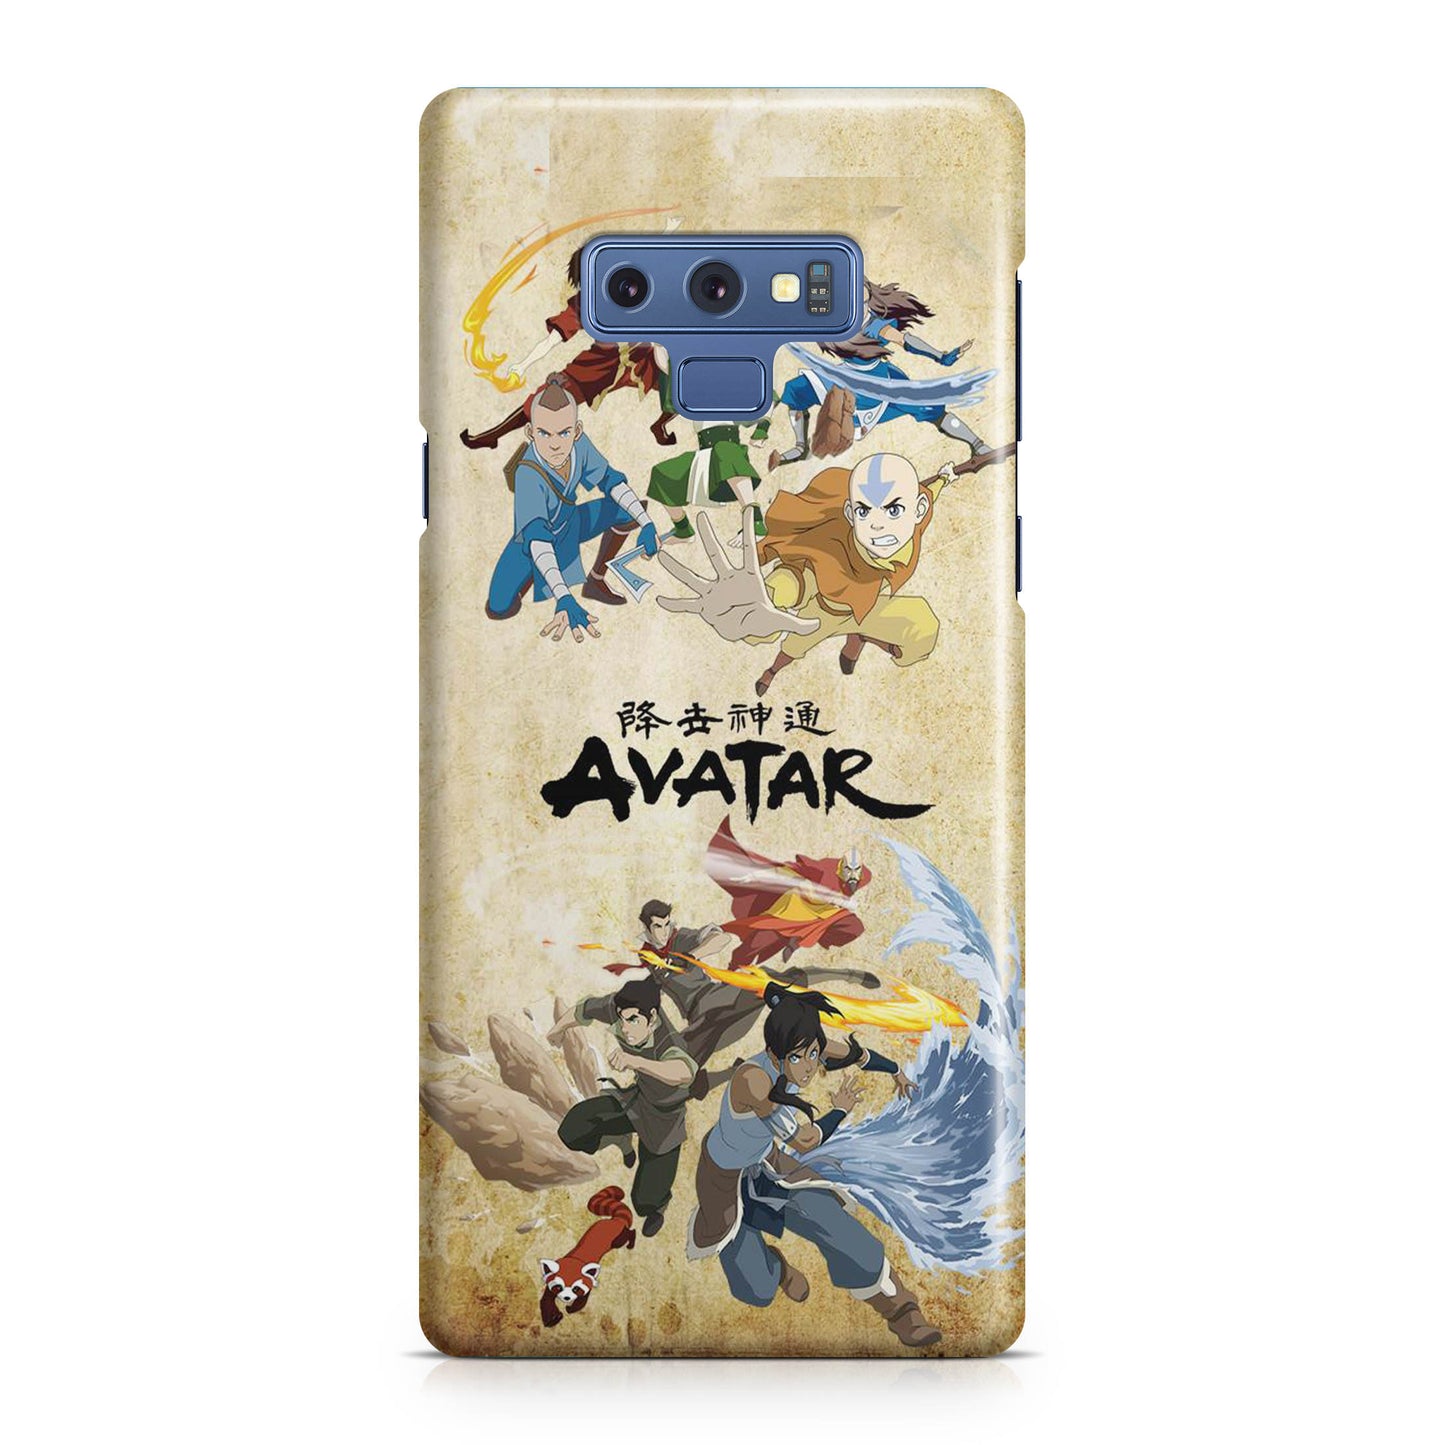 Avatar The Last Airbender & The Legend Of Korra Galaxy Note 9 Case